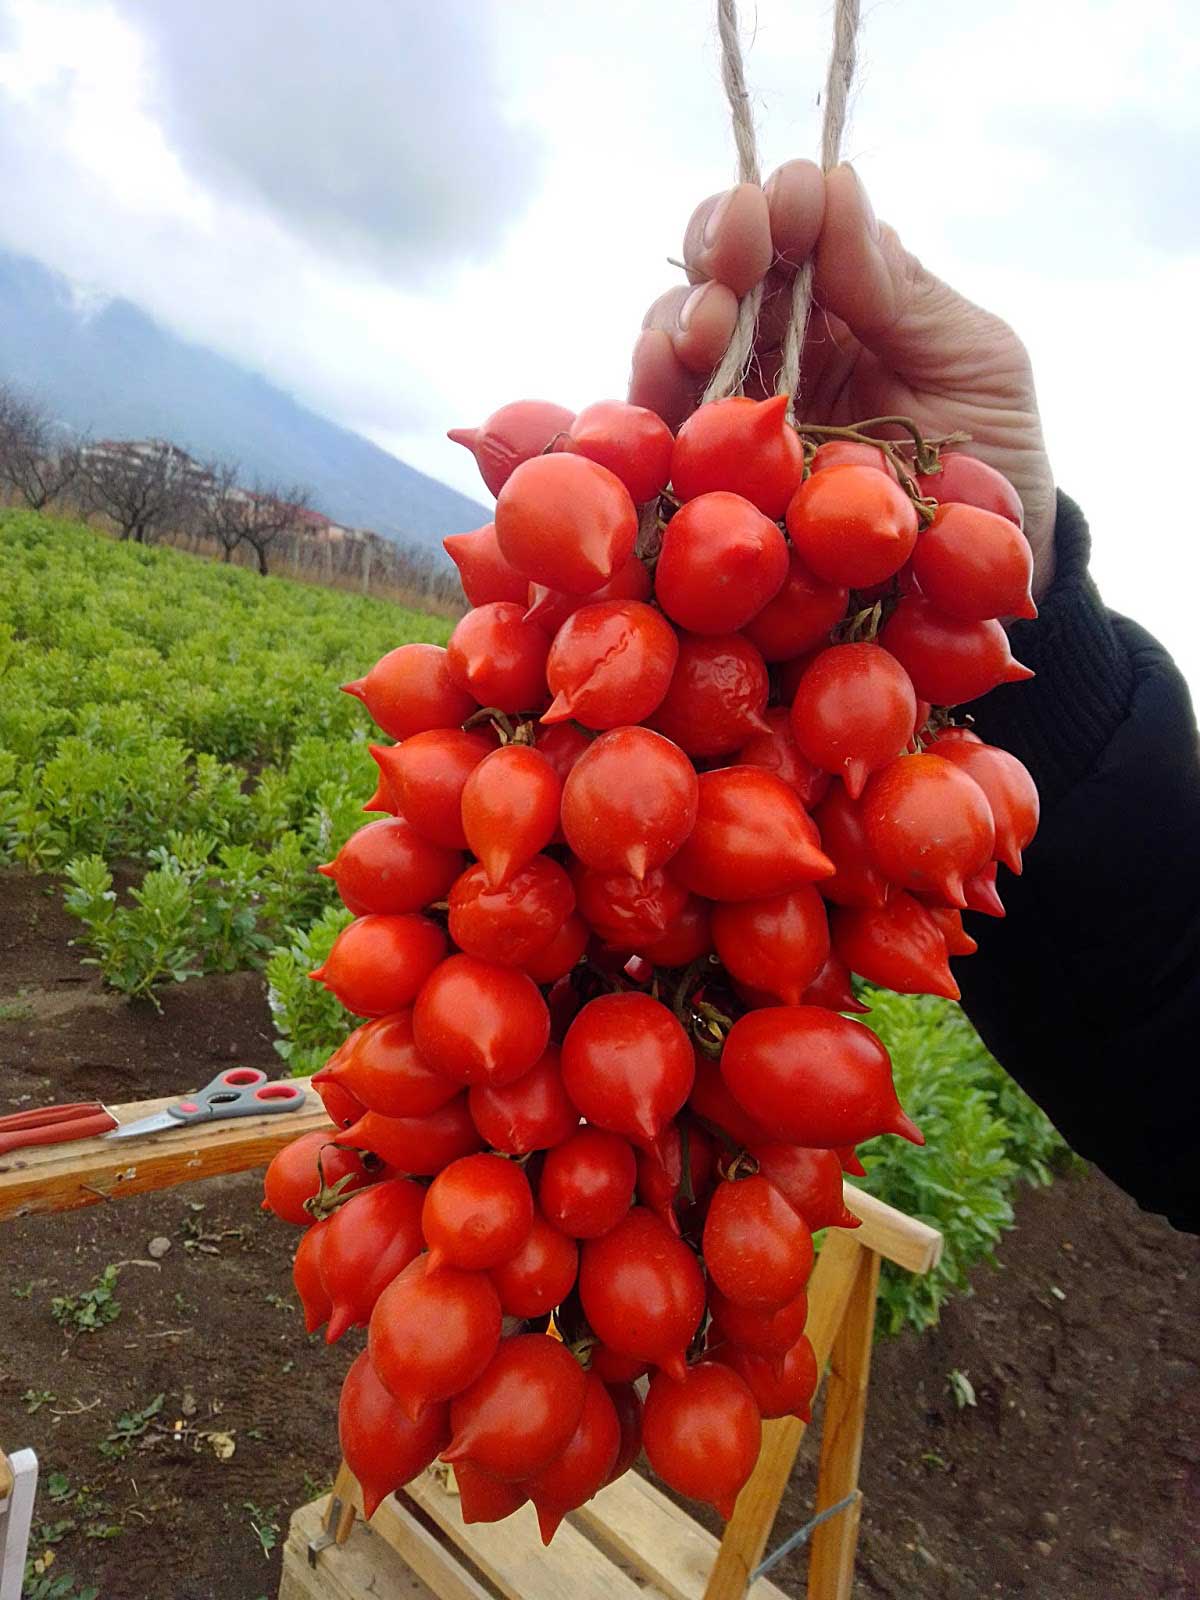 Piennolo tomatoes from Mount Vesuvius National Park